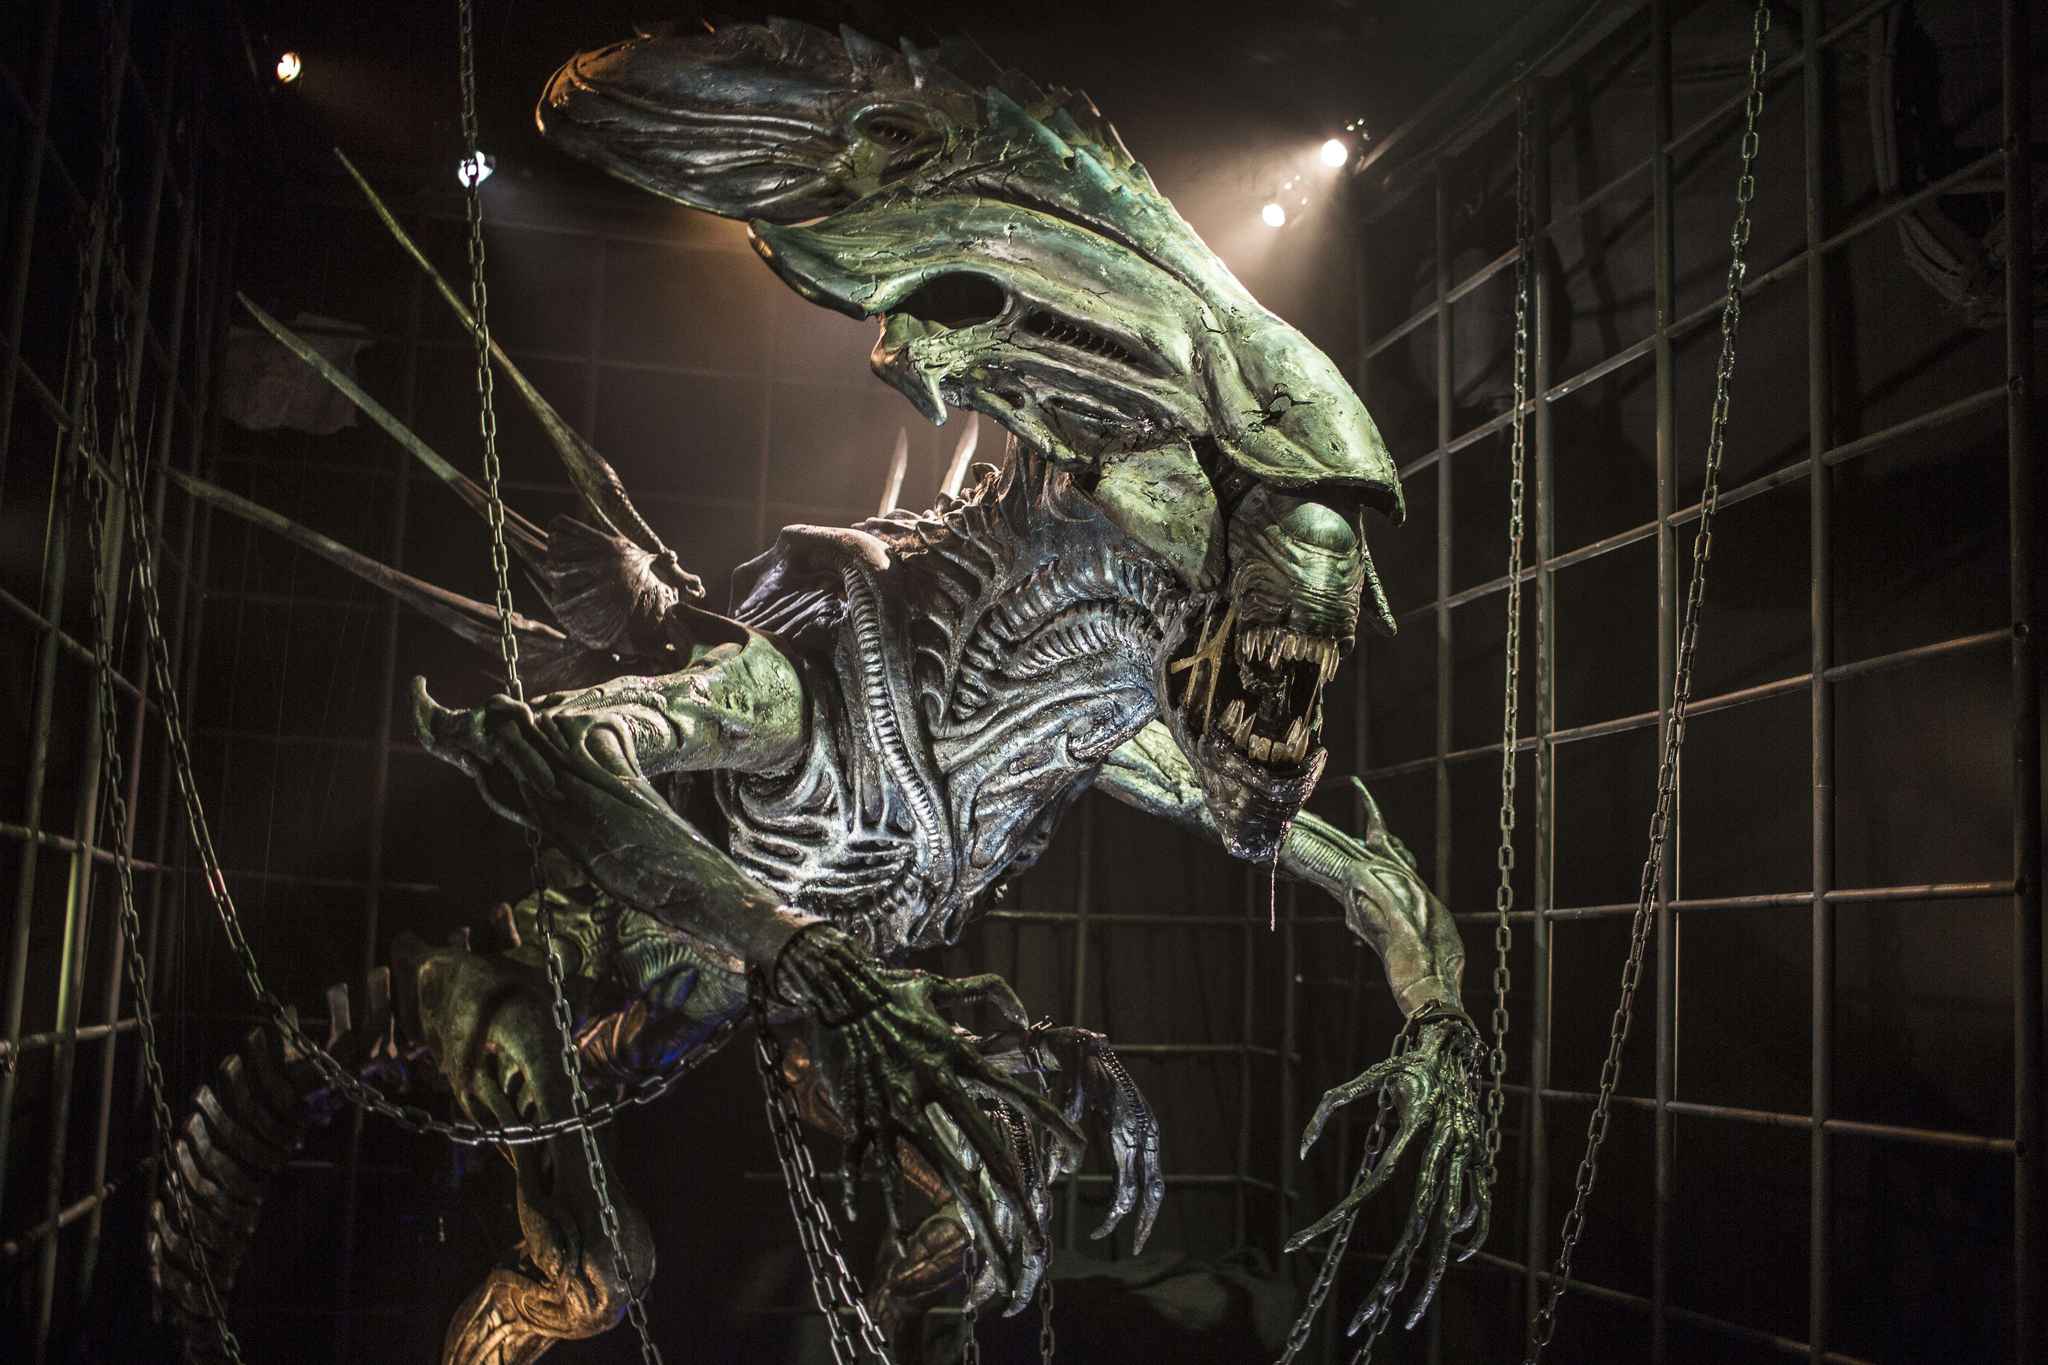 The movie props include the Alien Queen and much more you can see while you're in France.